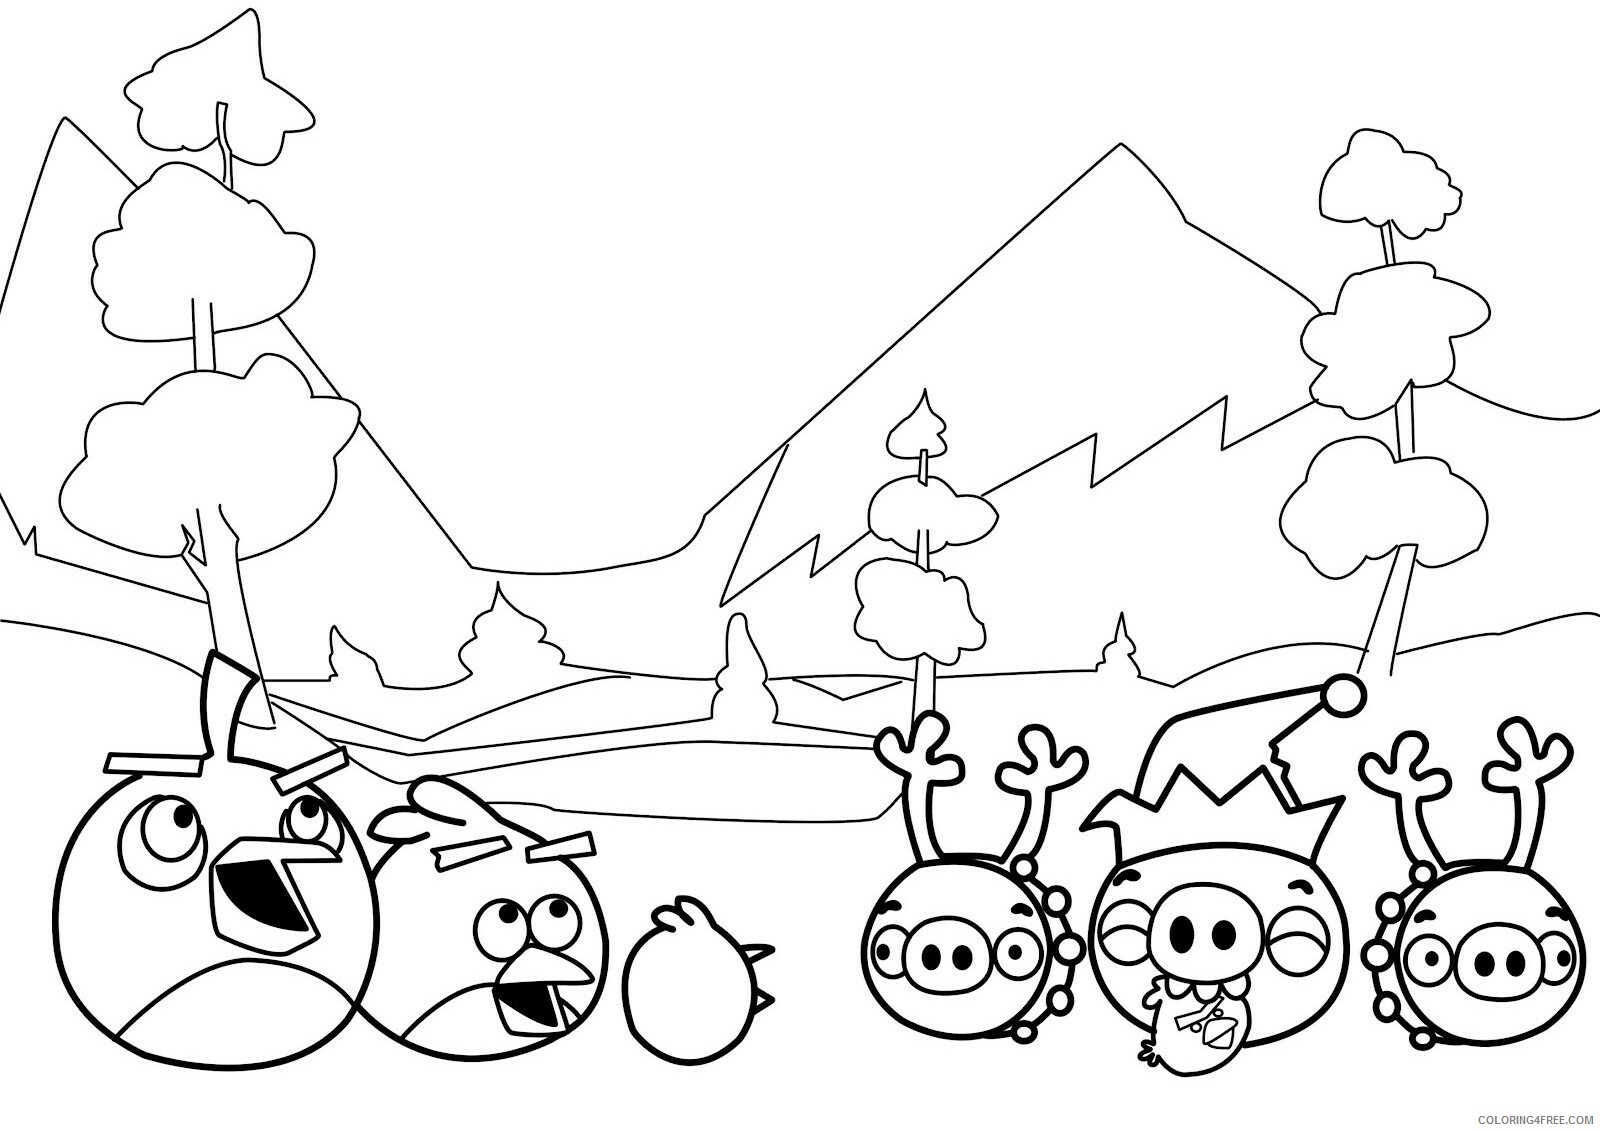 Angry Birds Coloring Pages Games angry_birds_cl15 Printable 2021 0059 Coloring4free